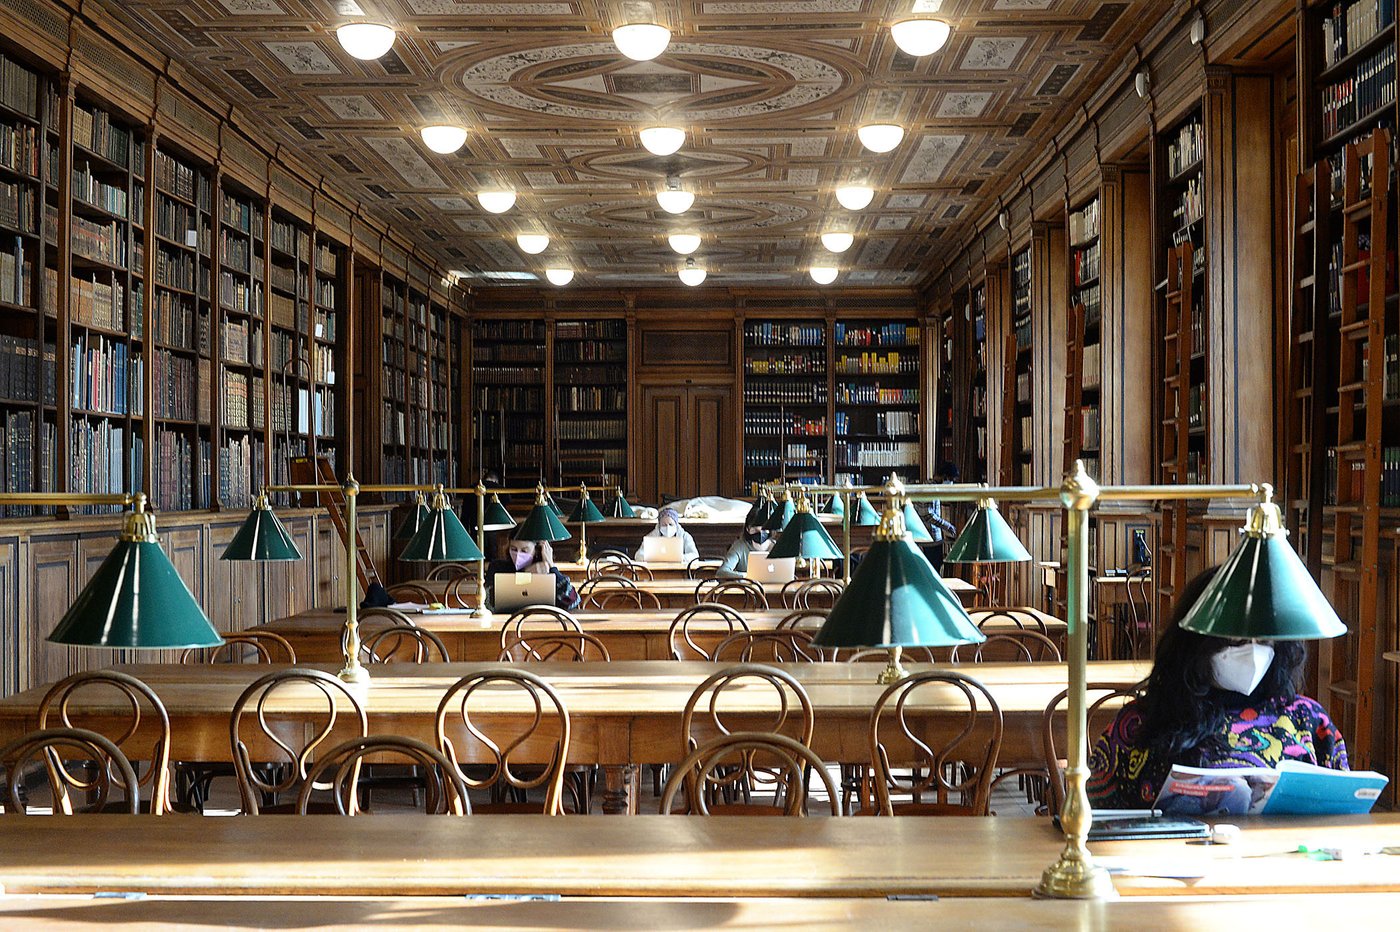 Historic reading room of the Academy of Fine Arts Vienna, designed by Theophil Hansen. Readers with laptops and FFP2 masks sit at sunlit tables.